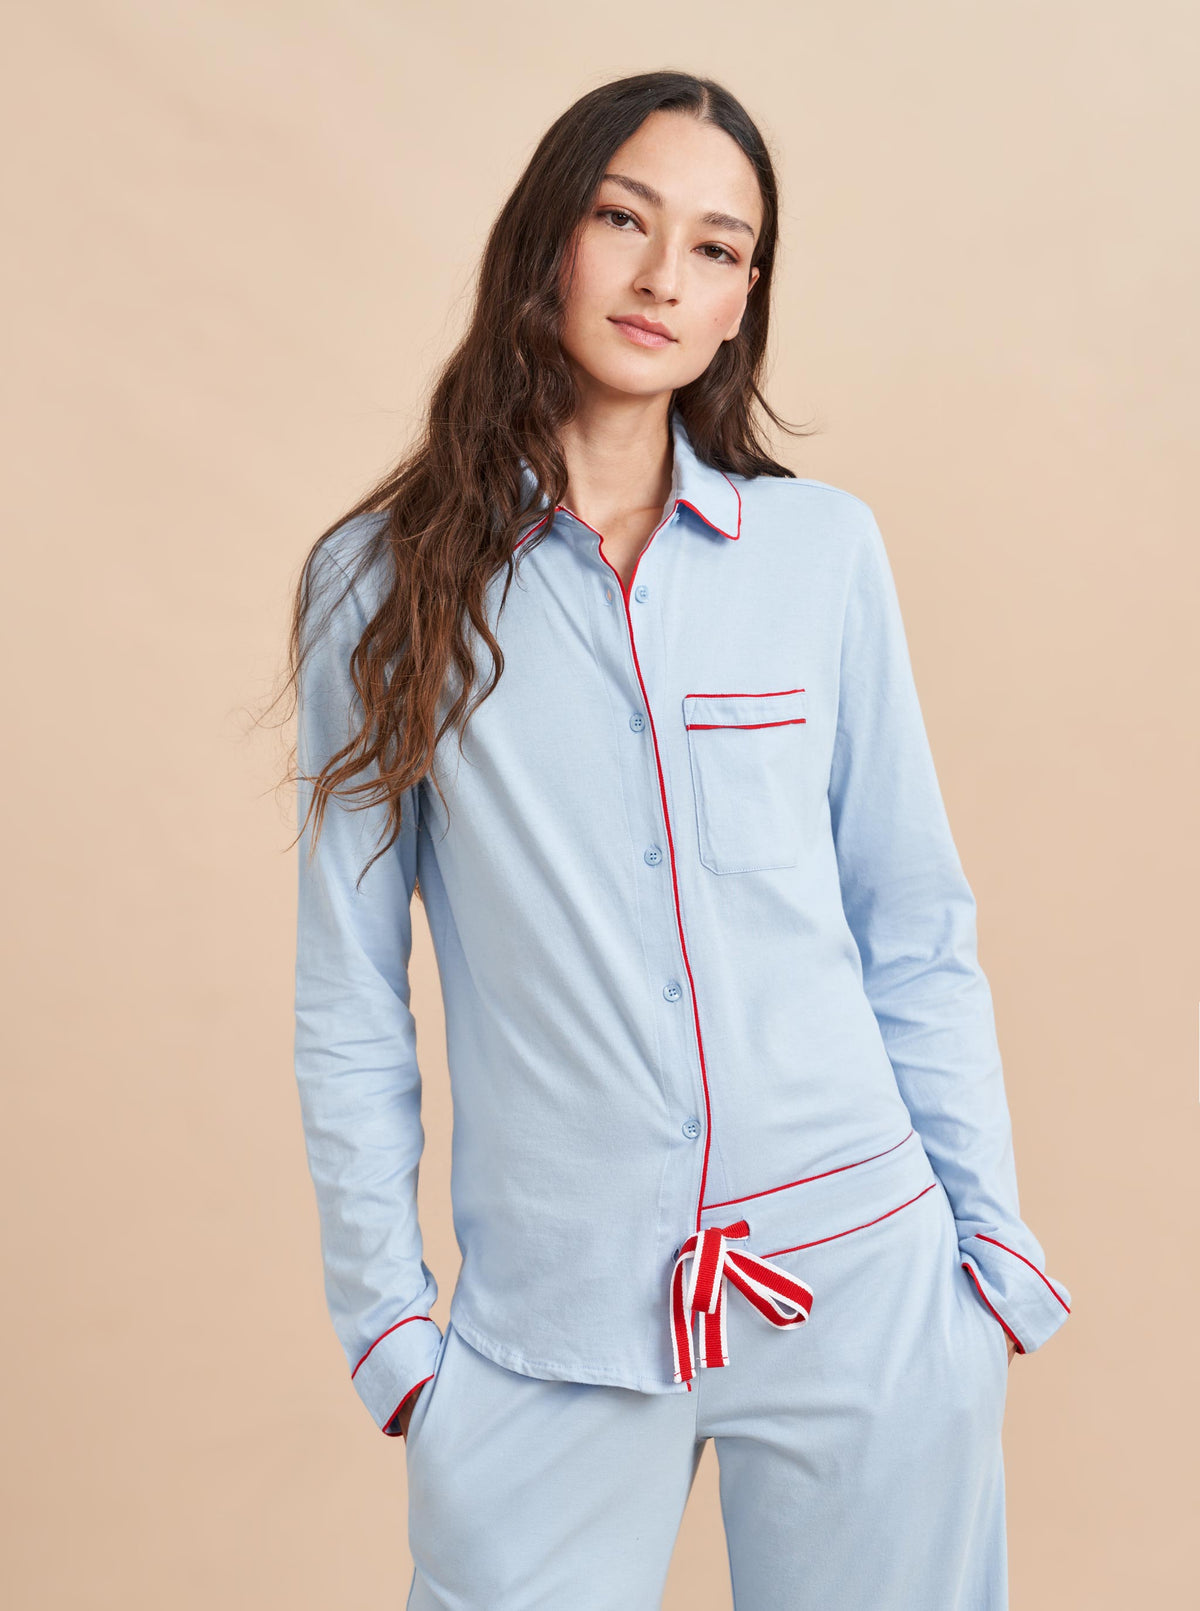 Pajama party ready. Our PJs are cut from our super soft t-shirt fabric for the ultimate in comfort and style when you need a little hygge. Pale blue cotton framed with contrasting red piping, our PJ set has a relaxed-fit top and elasticated drawstring wide-leg pants.